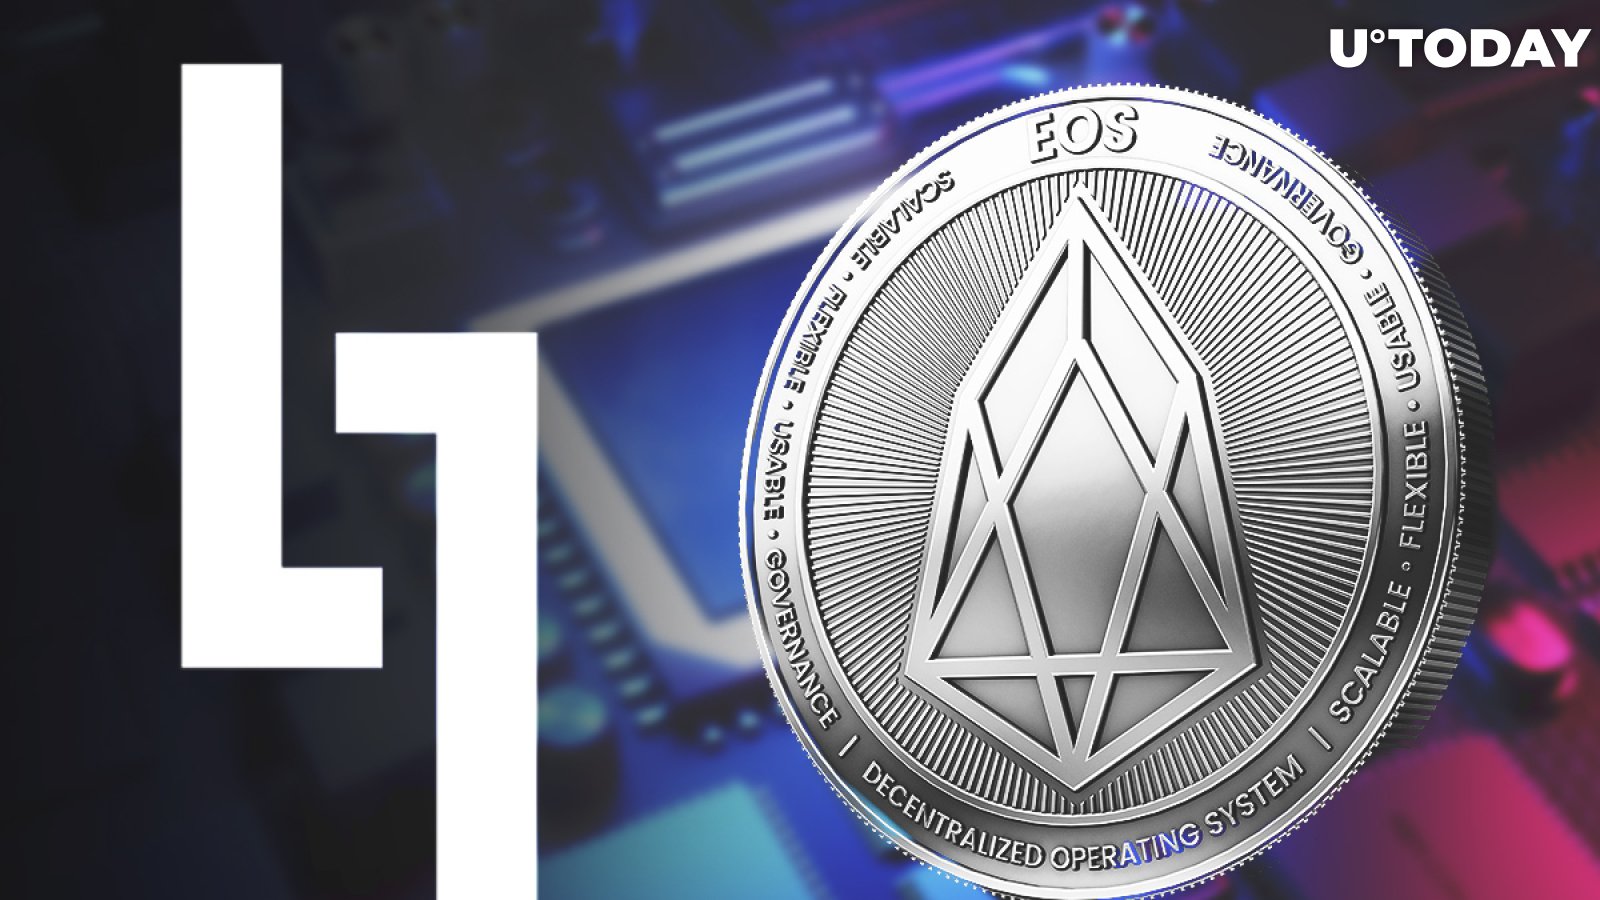 EOS Maker Block.One Buys RAM for $25 Mln Ahead of Big Announcement